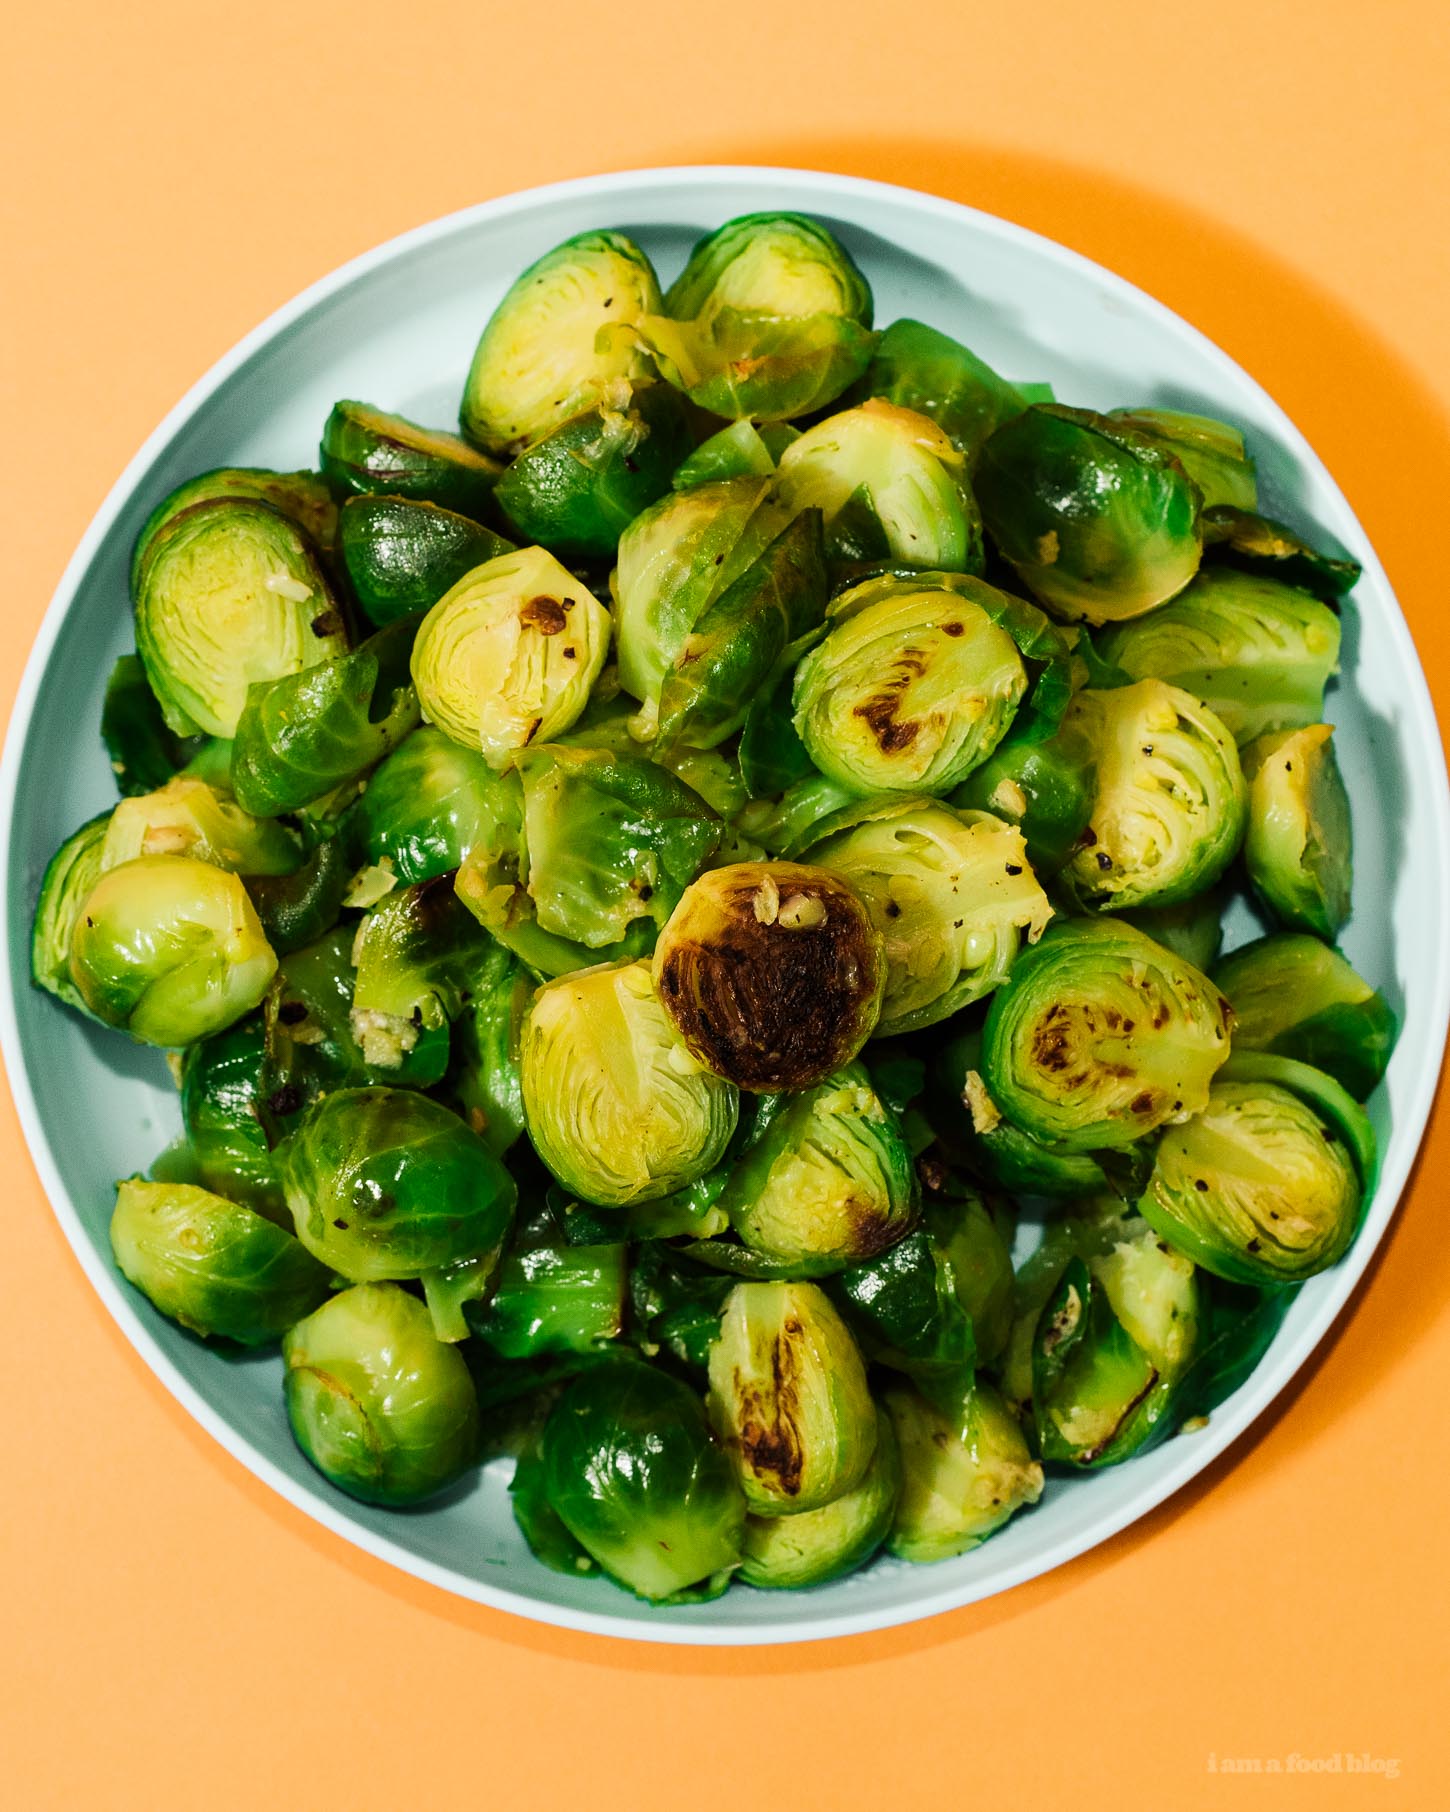 Super Tender Instant Pot Garlic Butter Brussels Sprouts Recipe | www.iamafoodblog.com